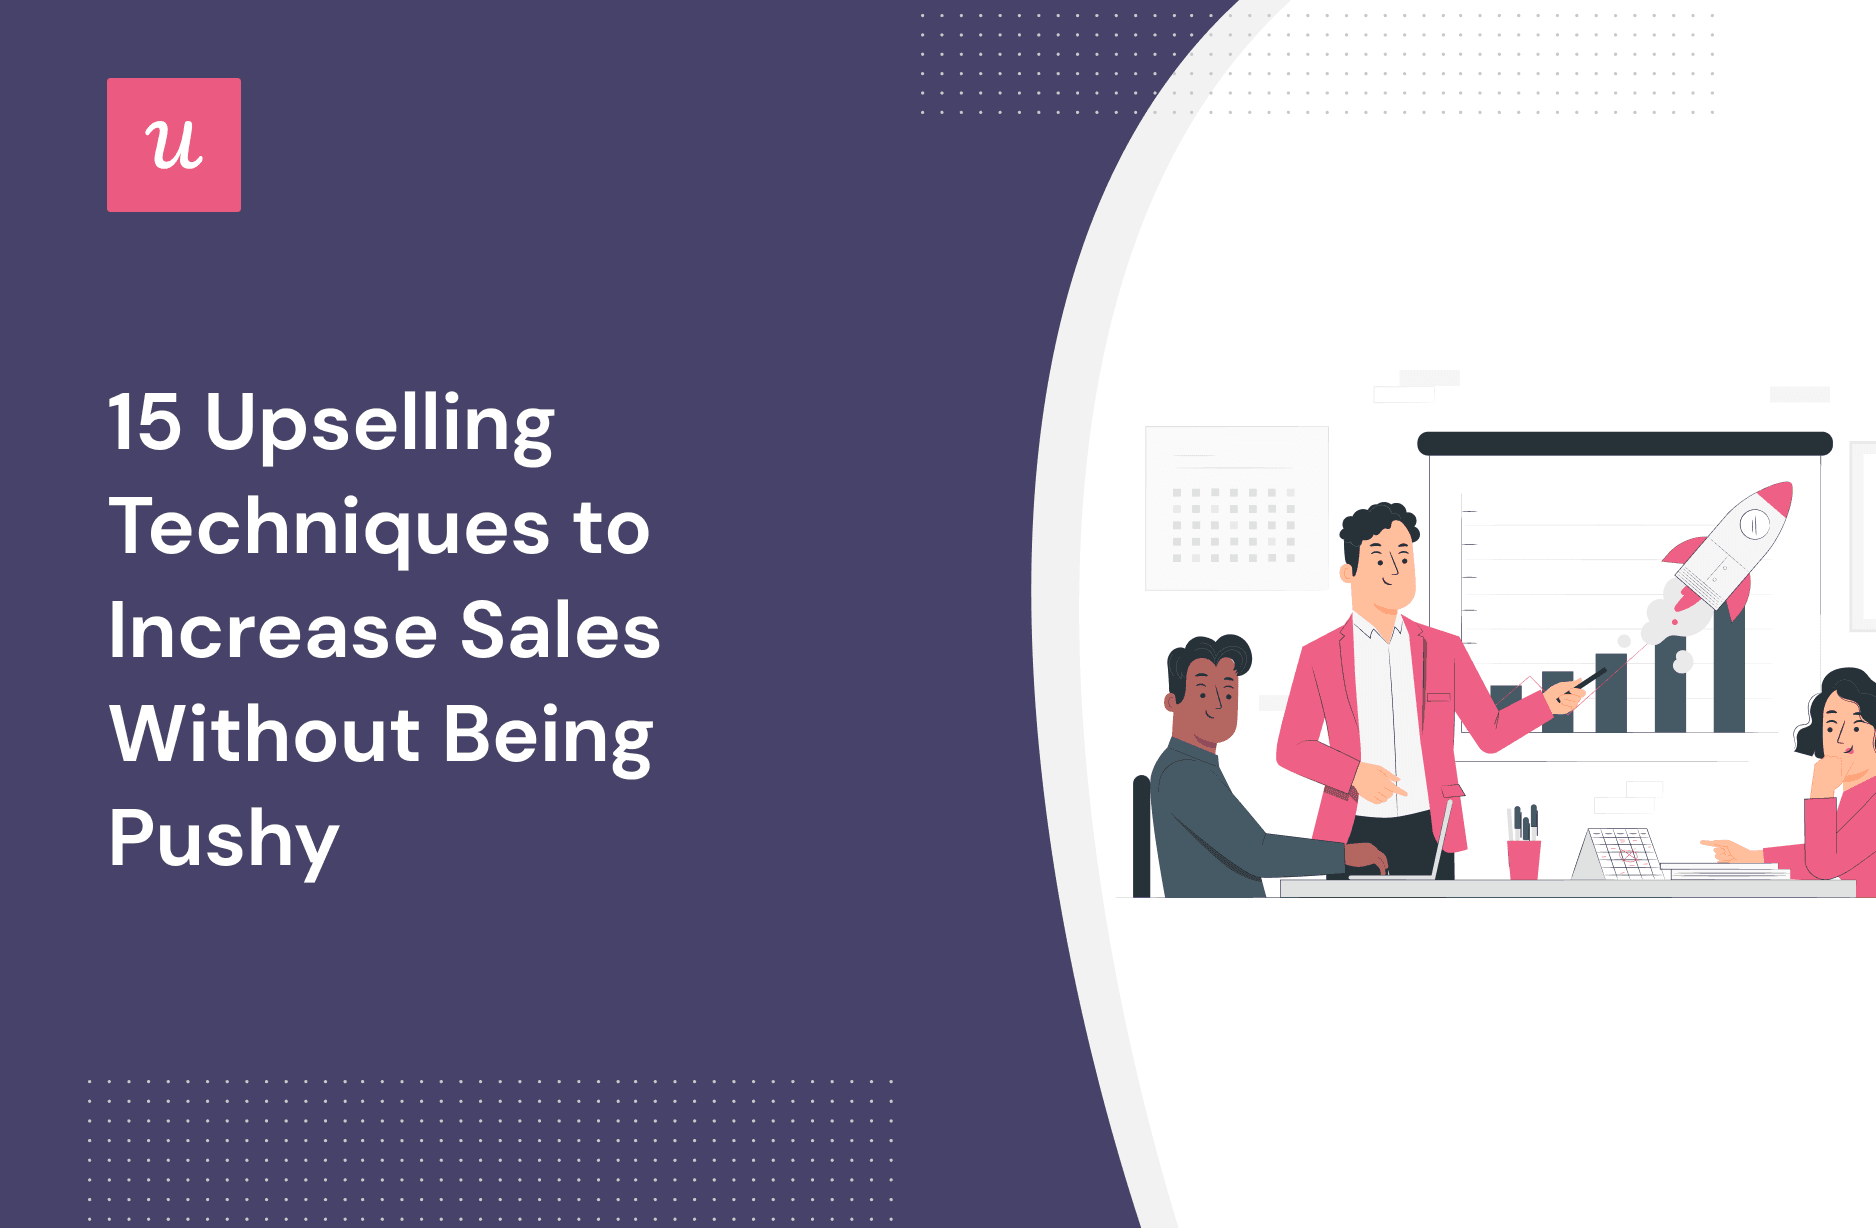 15 Upselling Techniques to Increase Sales Without Being Pushy cover